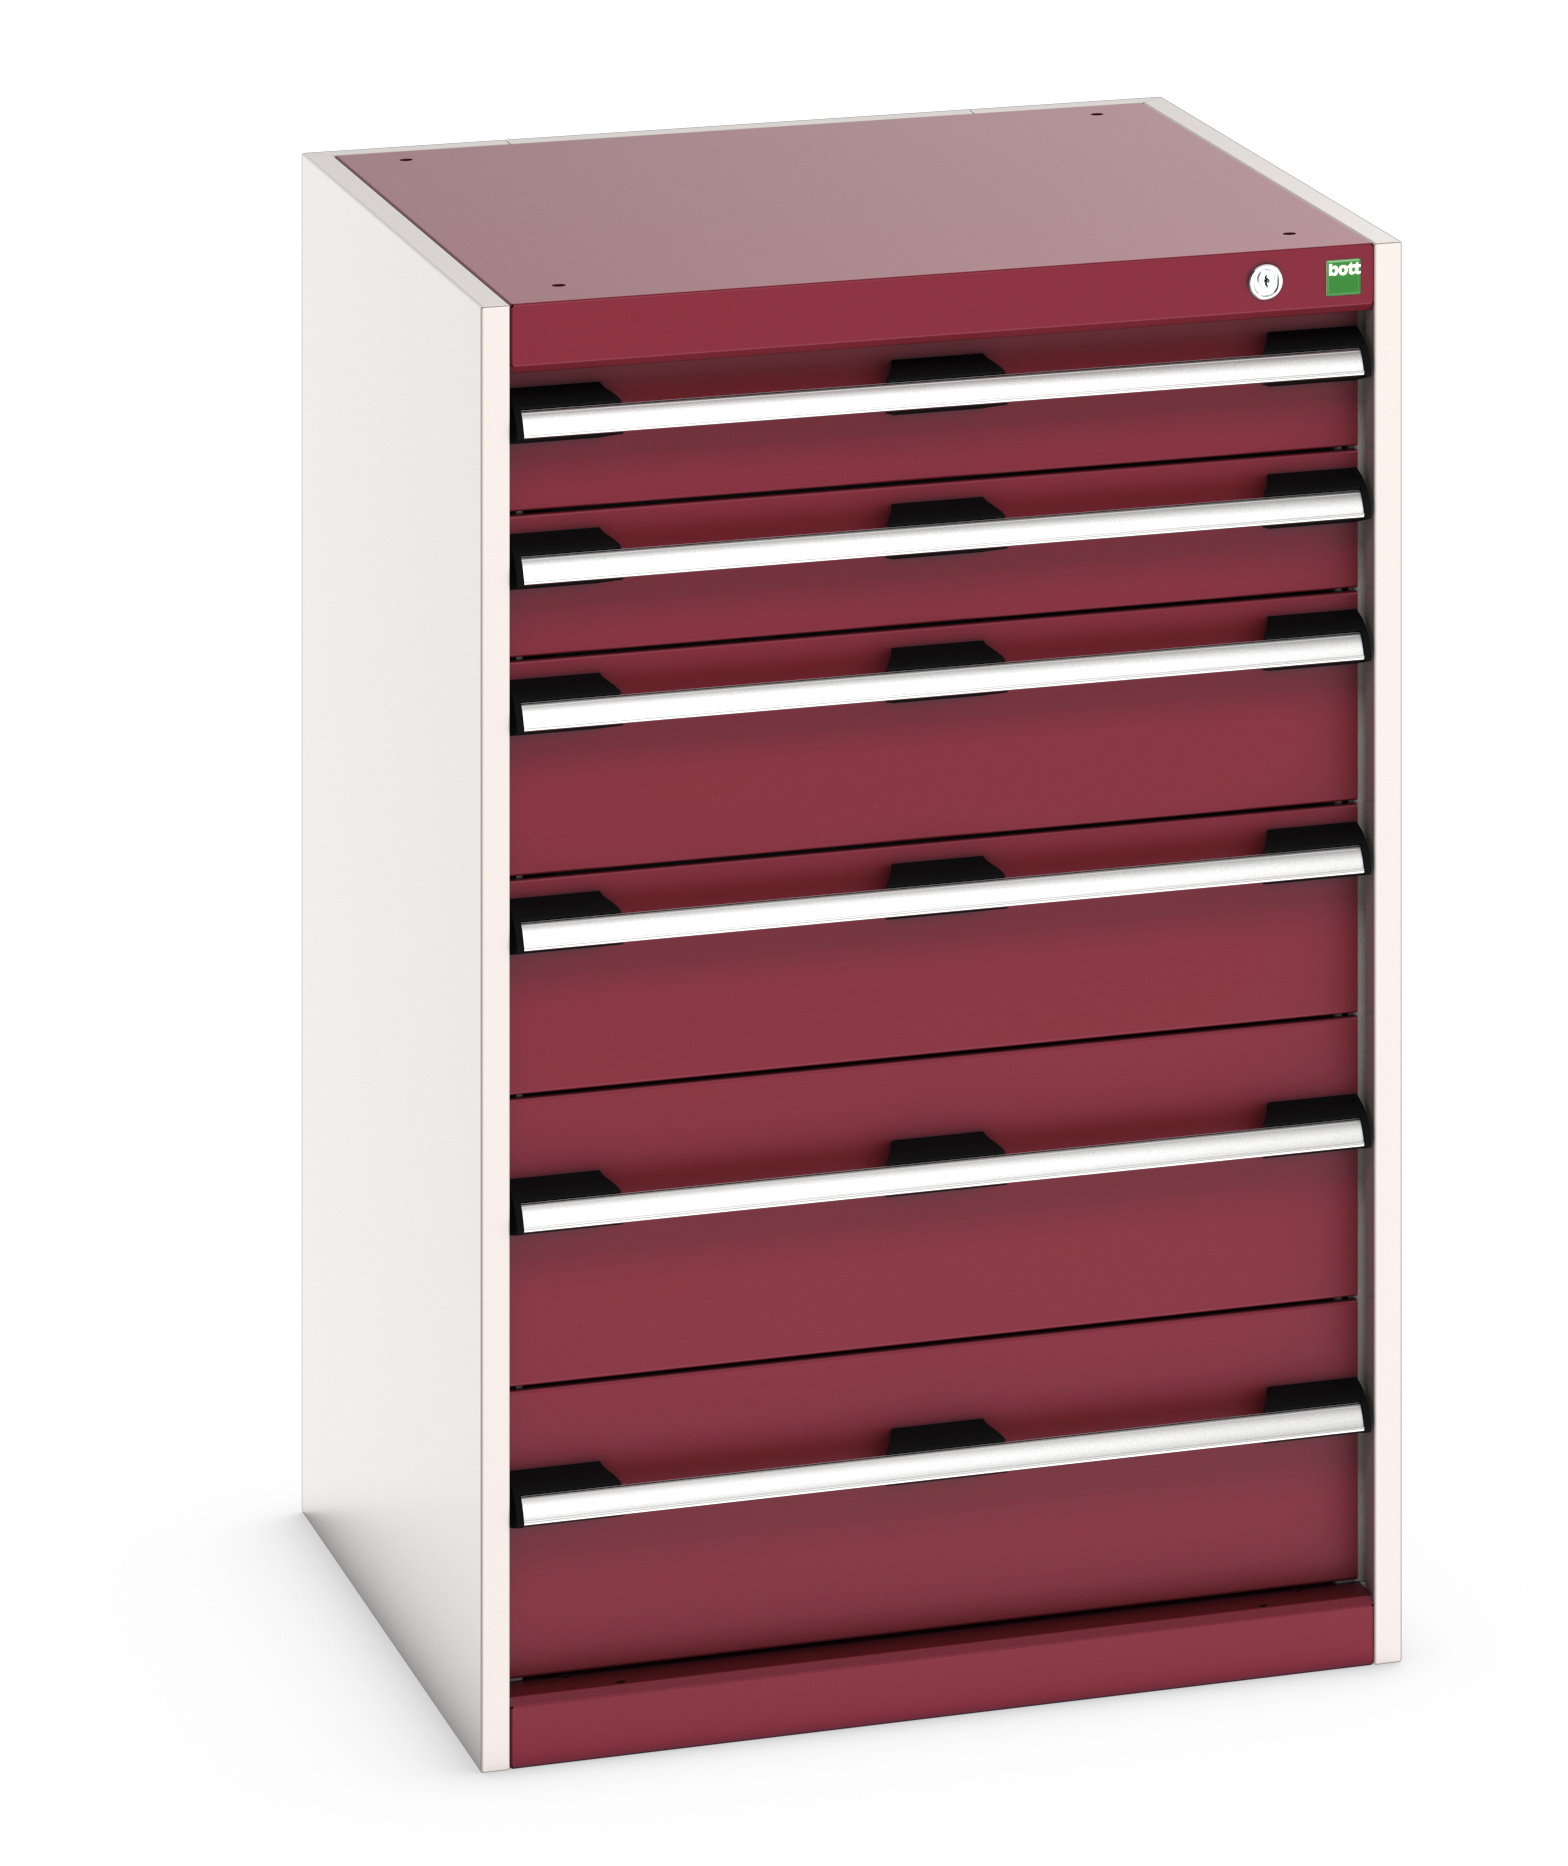 Bott Cubio Drawer Cabinet With 6 Drawers - 40019059.24V